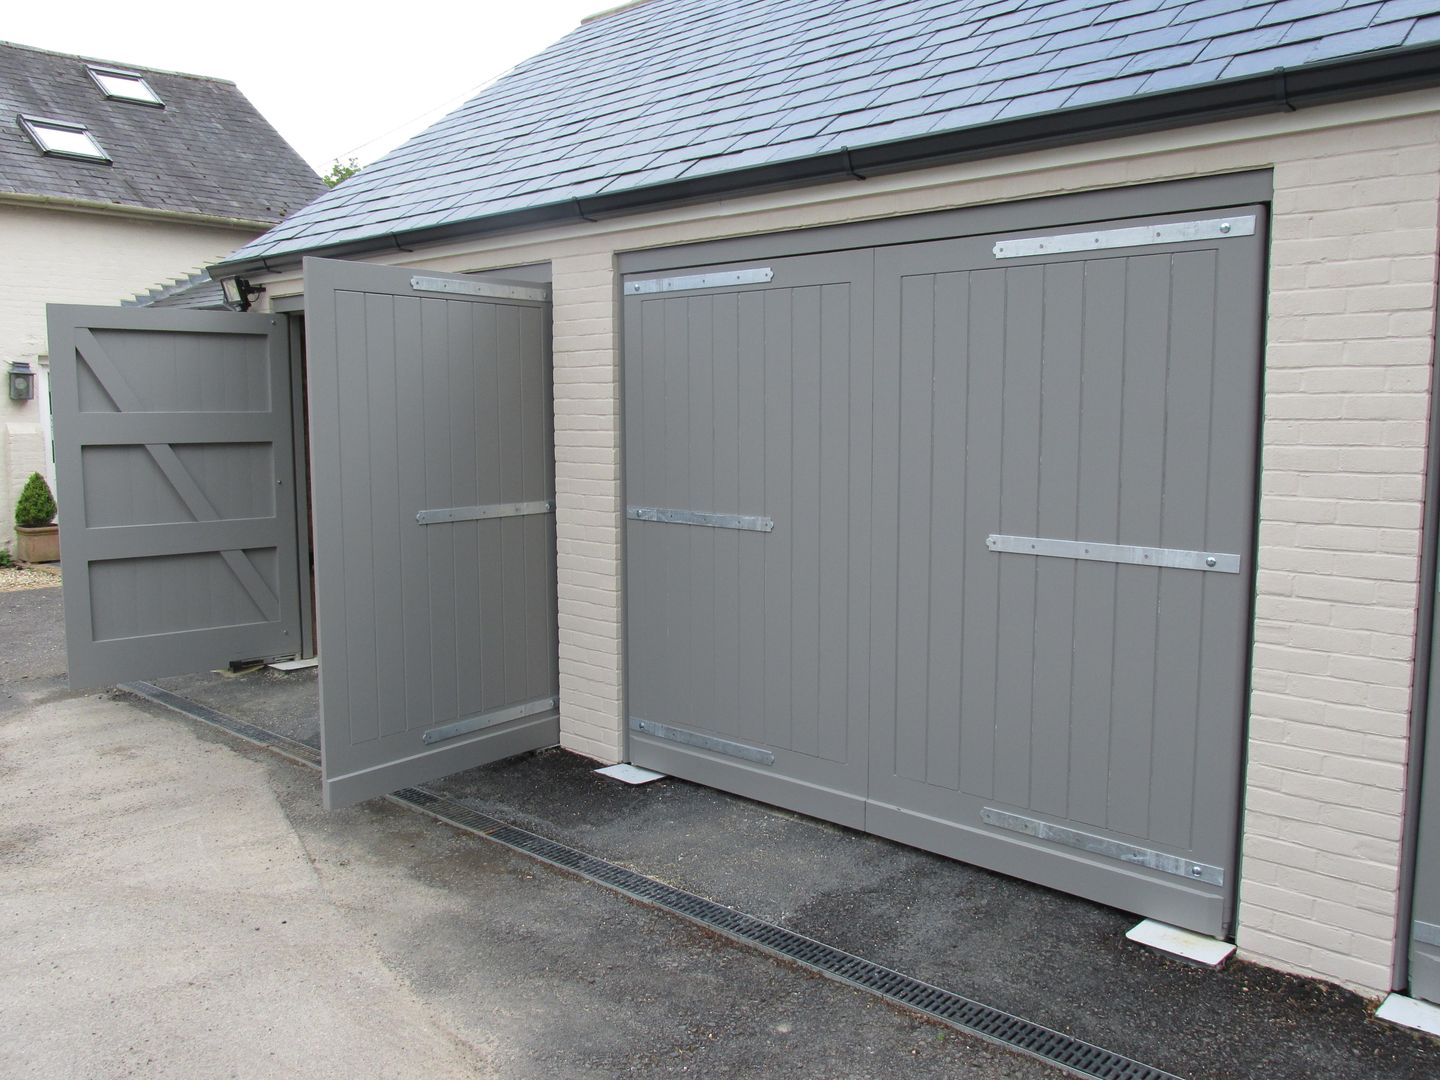 Remote control enabled access Portcullis Electric Gates Modern garage/shed